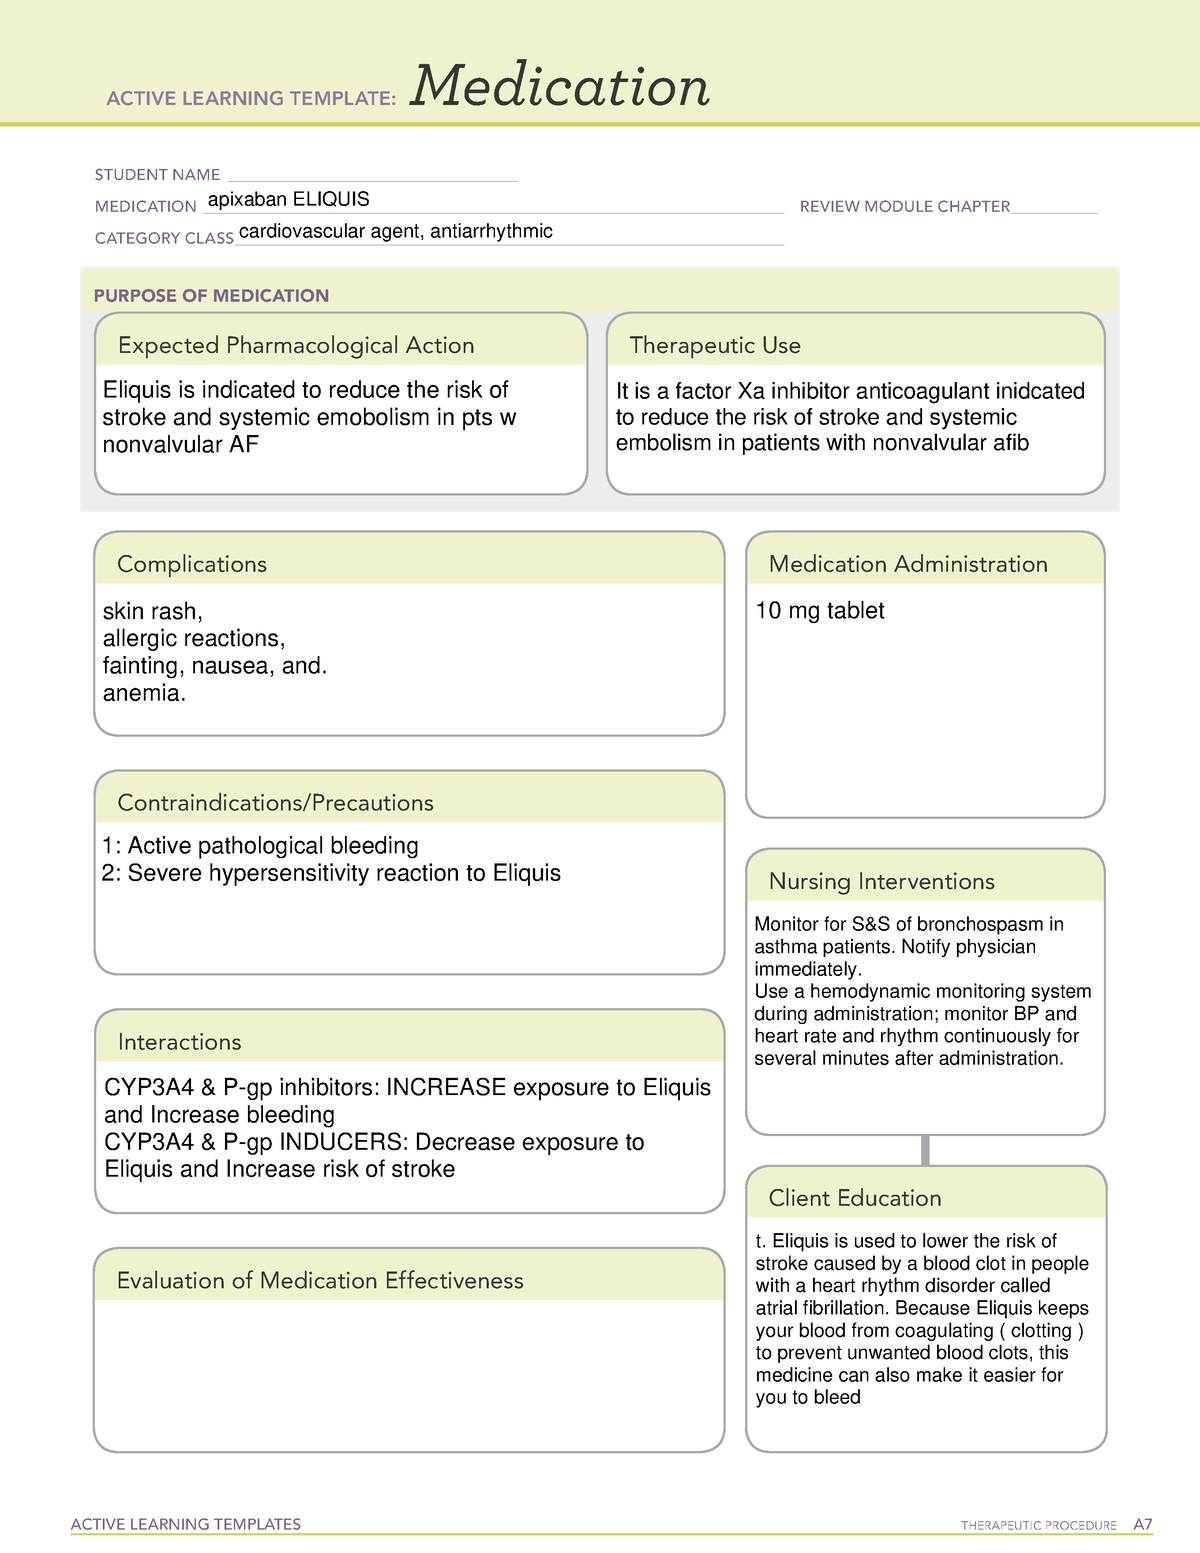 ati-medication-template-for-med-list-active-learning-templates